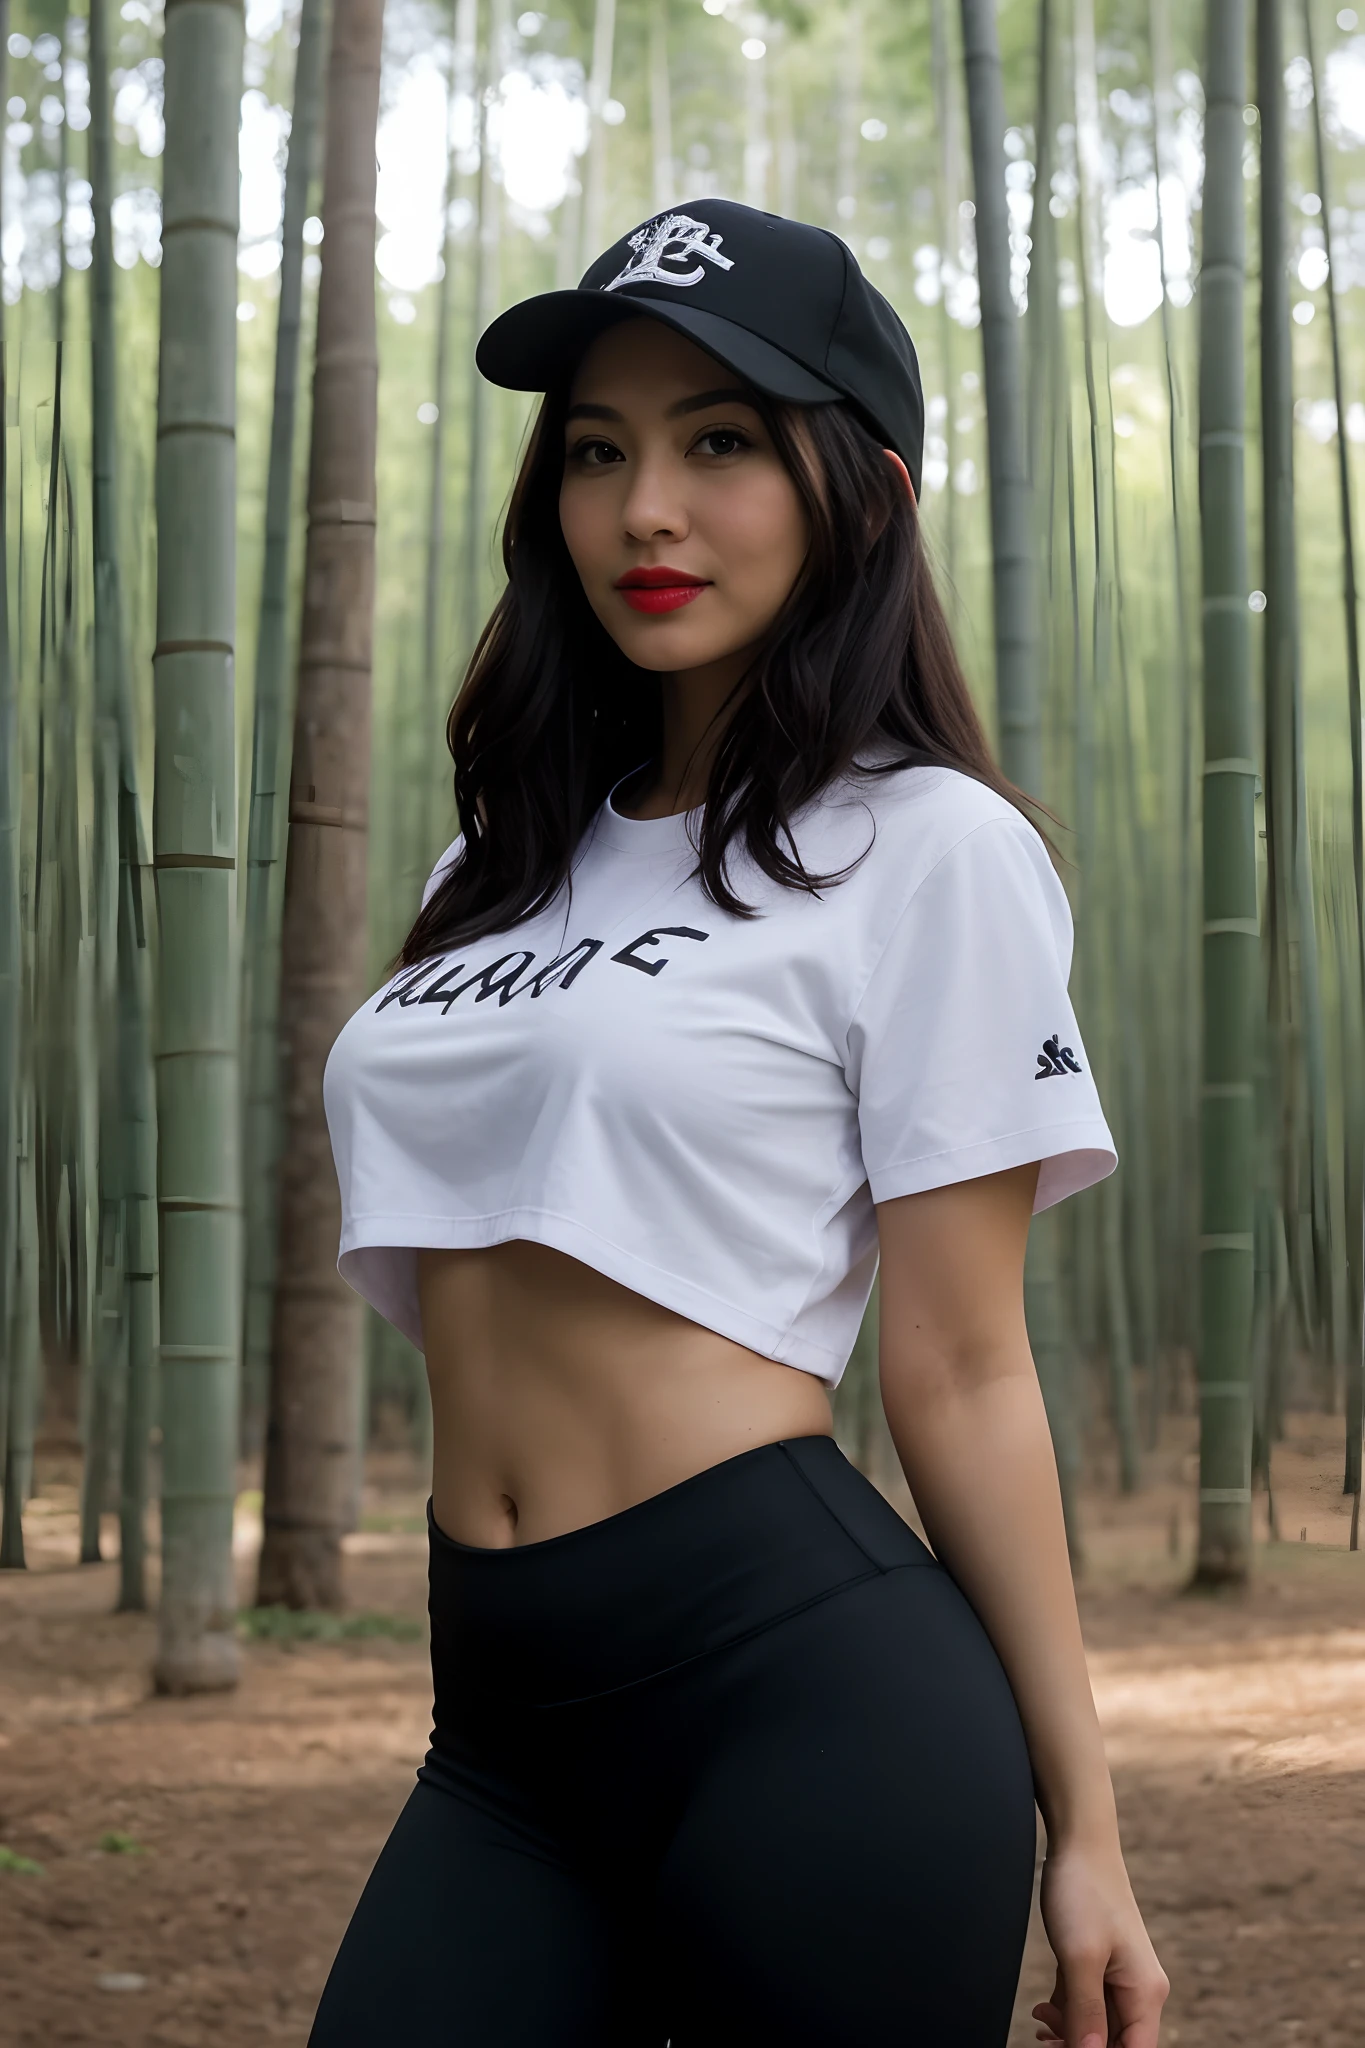 1female，36 years old，MILF，mature，Bigchest，Big breasts Thin waist，long leges，Raised sexy，Pornographic exposure， solo，（Background with：bamboo forrest，clubs） She has very short black hair，standing on your feet，Sweat profusely，drenched all over the body，seen from the front， hair straight， mostly cloudy sky，（（（tmasterpiece），（Very detailed CG unity 8K wallpaper），best qualtiy，cinmatic lighting，detailed back ground，beatiful detailed eyes，Bright pupils，（Very fine and beautiful），（Beautiful and detailed eye description），Black eyes，Redlip，ultra - detailed，tmasterpiece，）），facing at camera，（The upper part of the body），A high resolution，ultra - detailed），revealing breasts，Bare genitals，  Bulge，legs are open，sexyposture，Camel toes，Flushed complexion，Open-mouthed，frontage，（Wearing：baseball cap，Red baseball shirt，black colored leggings，athletic sneakers），Full body photo，Show shoes